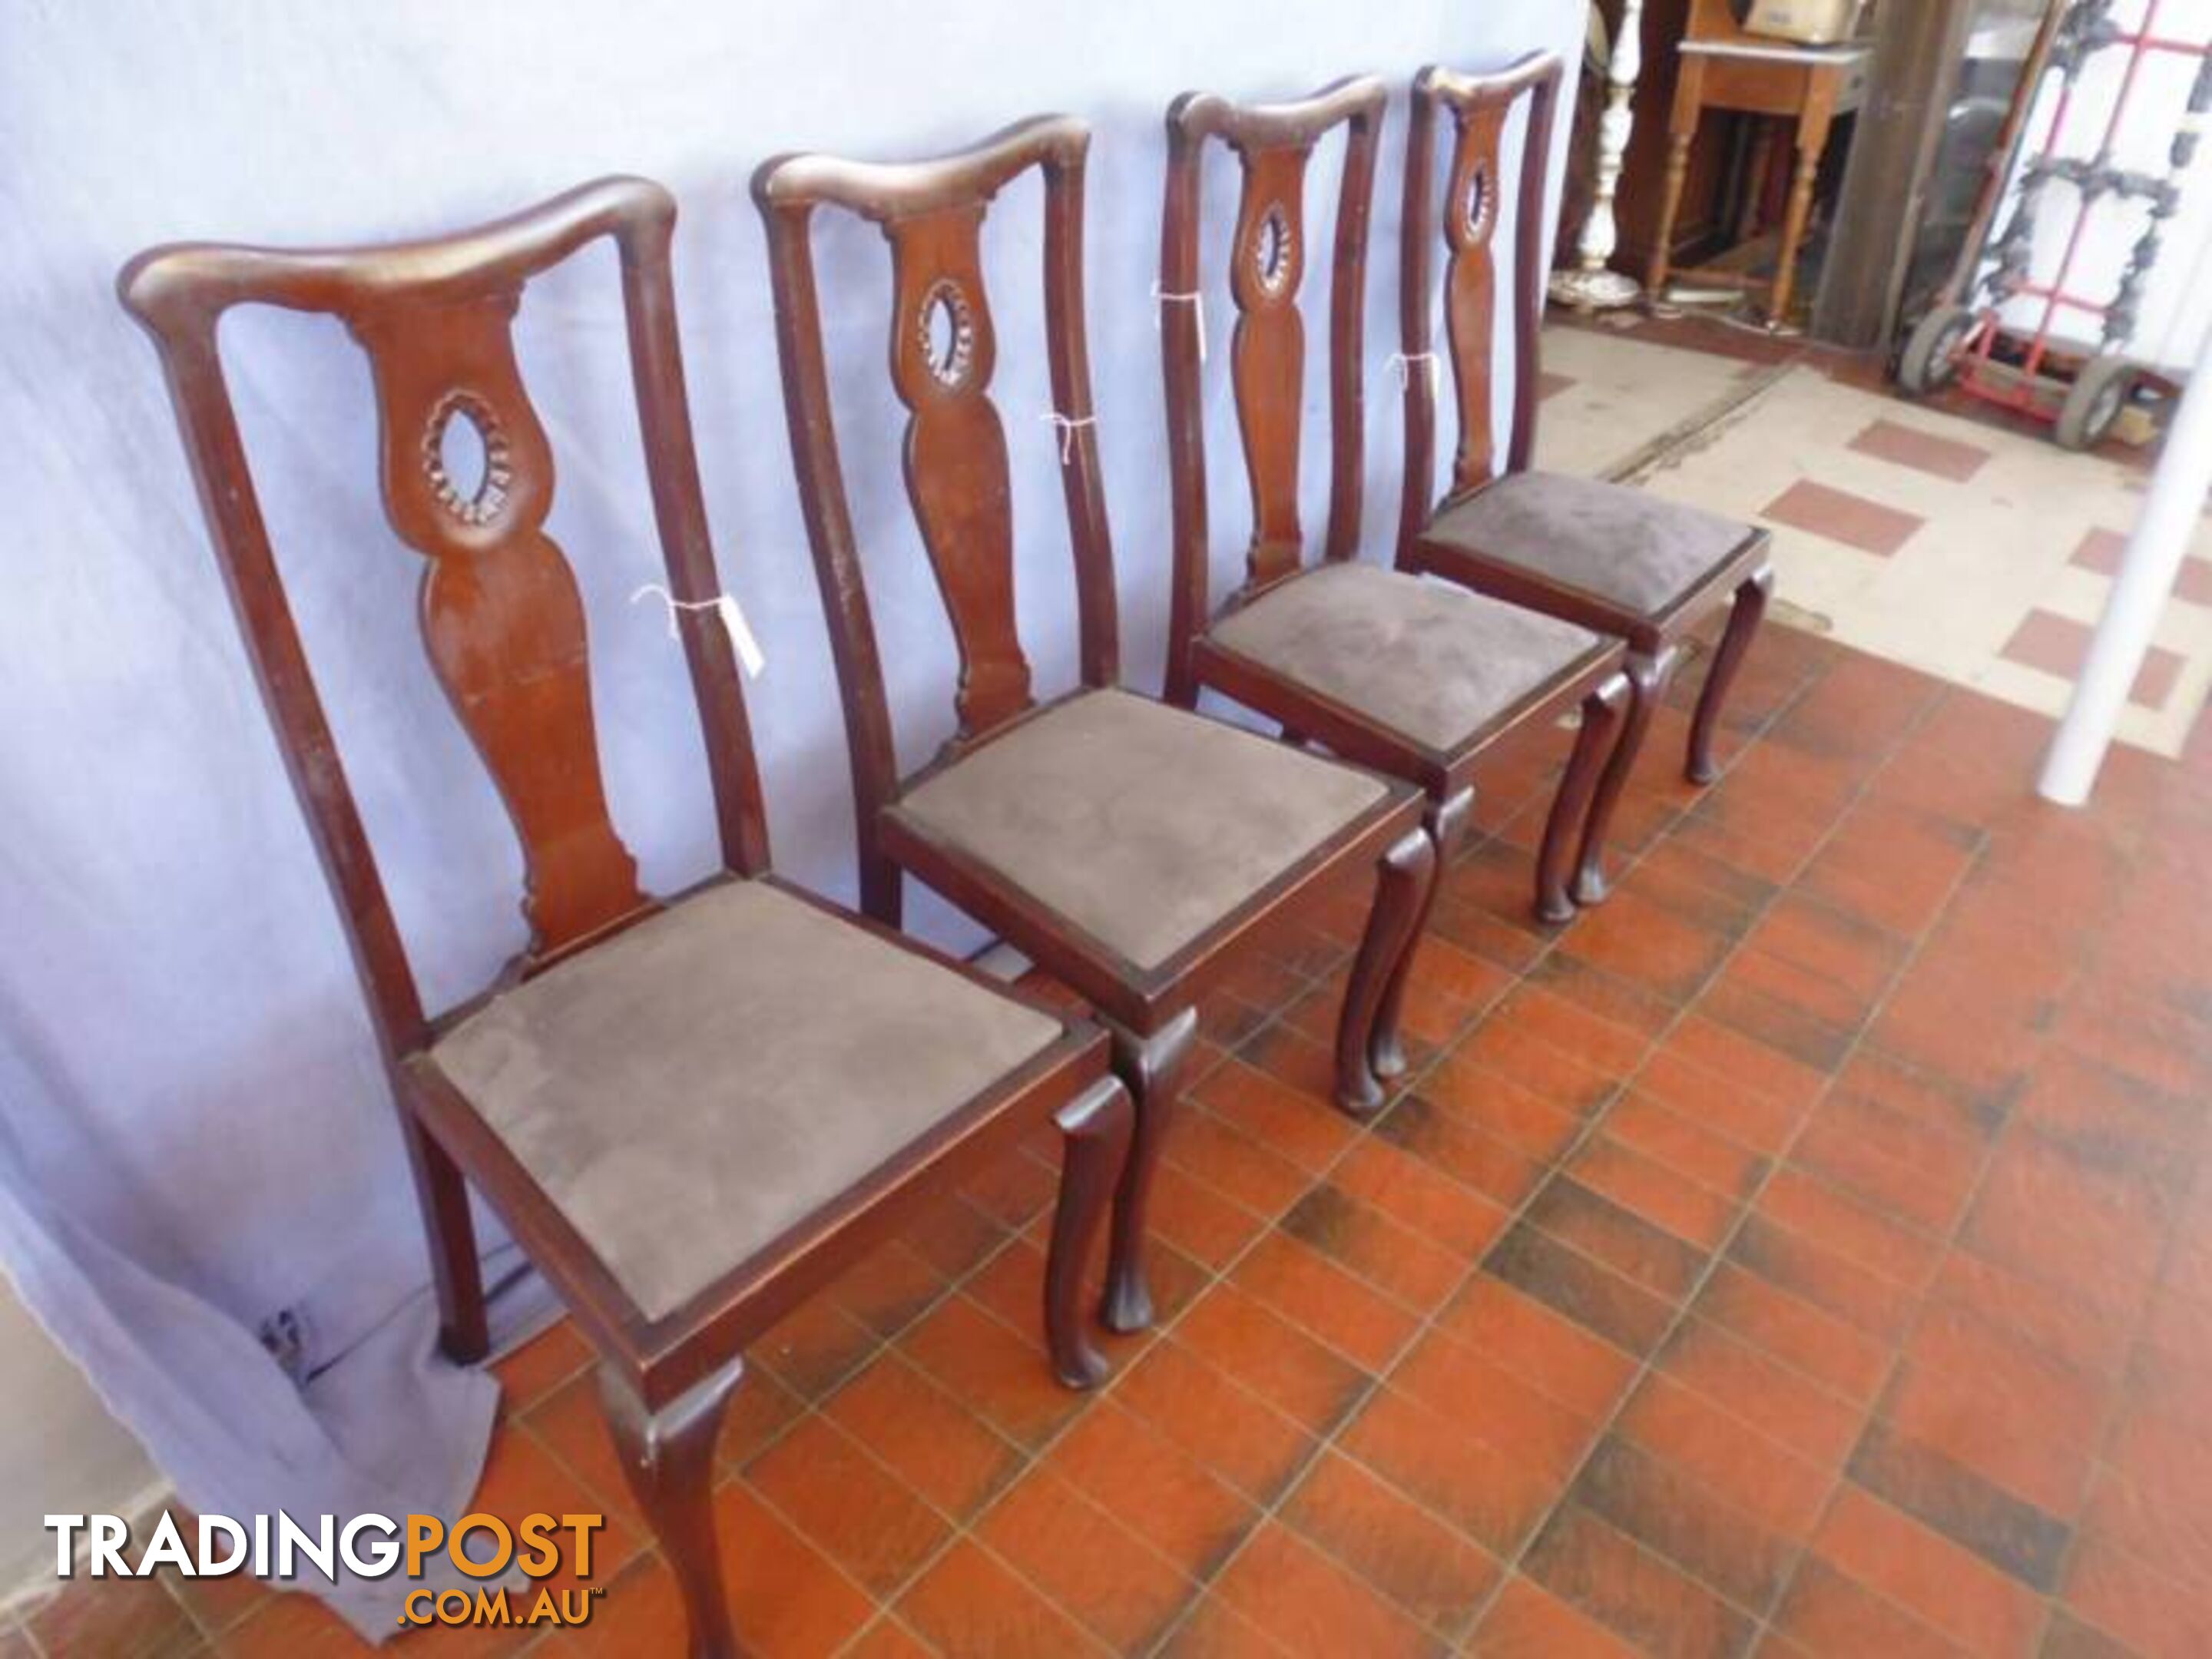 Chairs, 4, Cabriole Legs, 368757